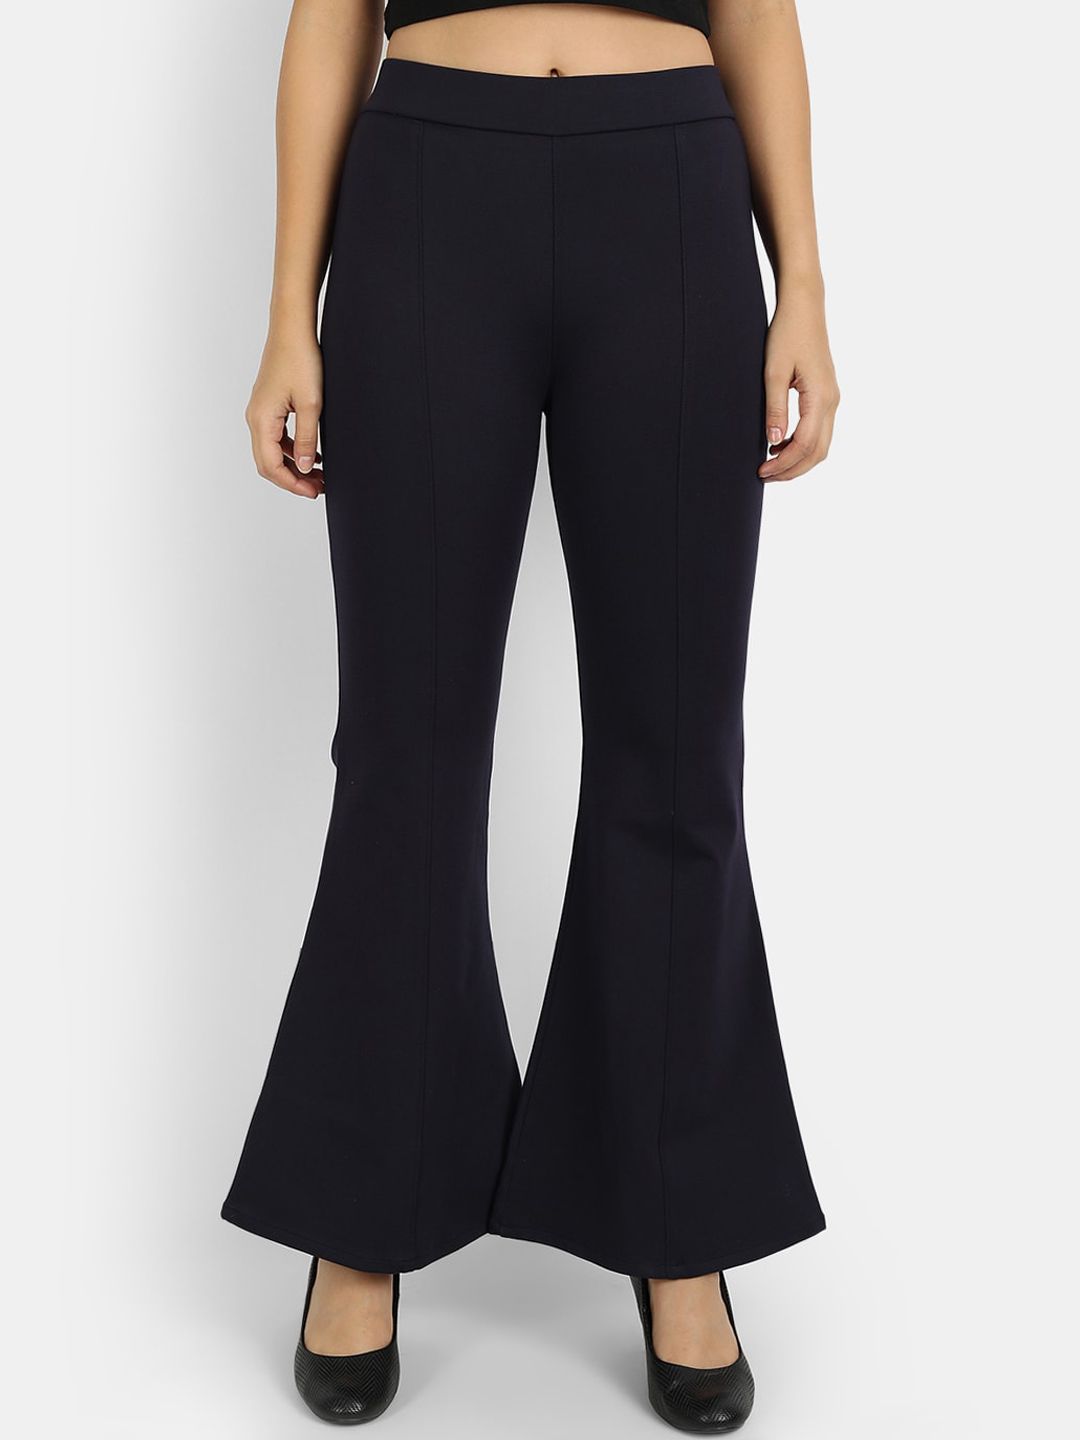 Next One Women Navy Blue Flared High-Rise Trousers Price in India